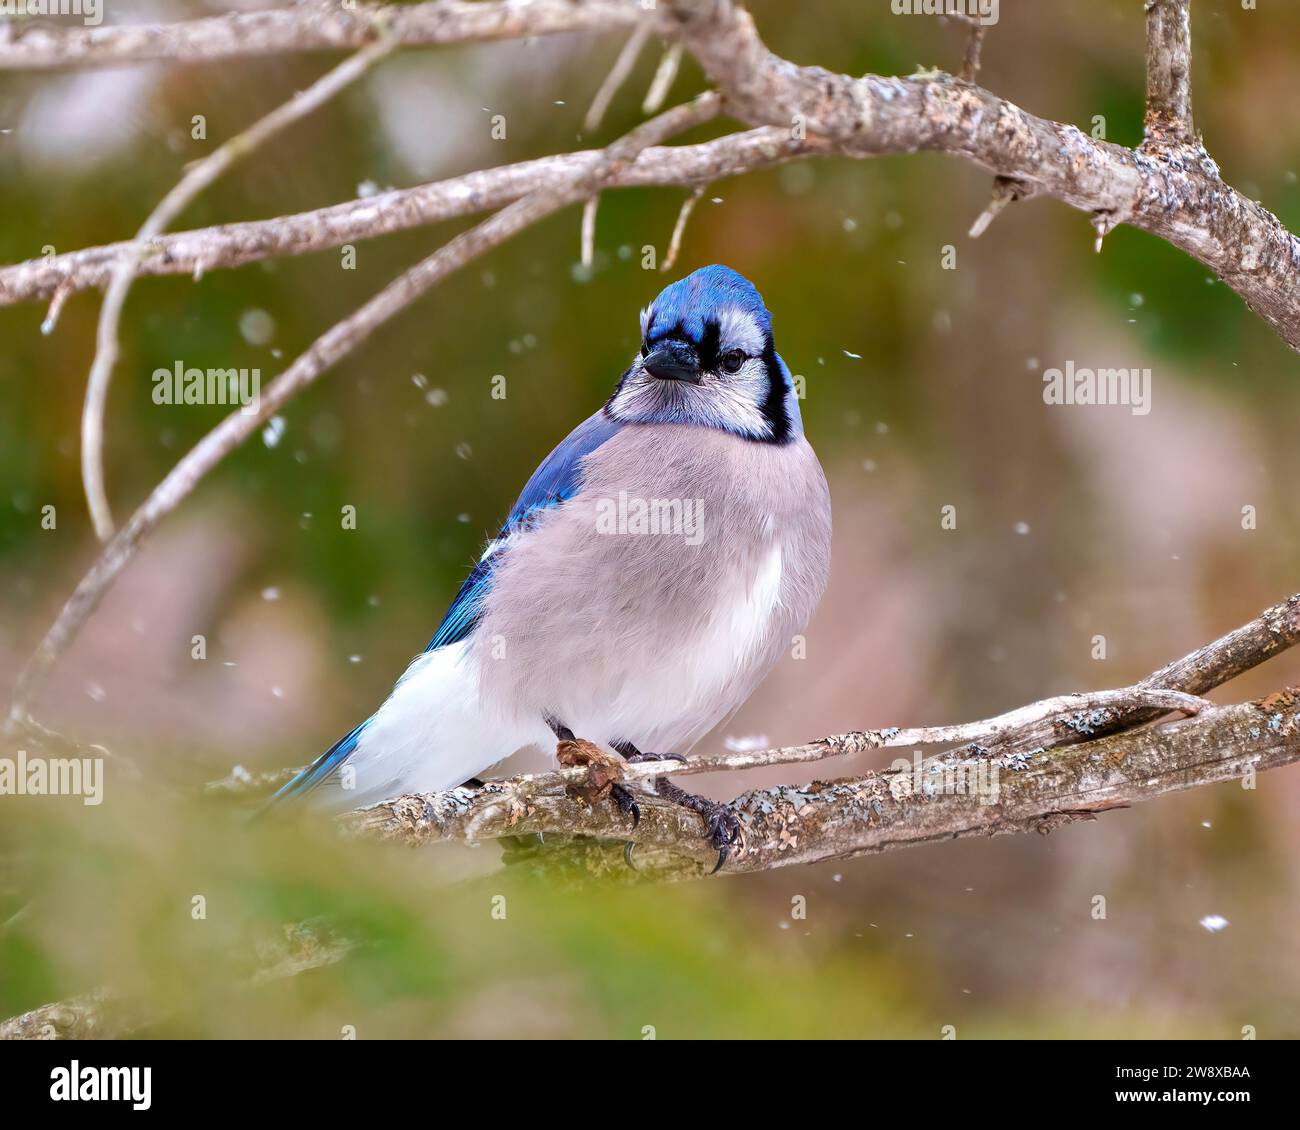 Blue Jay close-up front view perched in the winter time with falling snow and a blur soft background in its environment and habitat. Jay Picture. Stock Photo